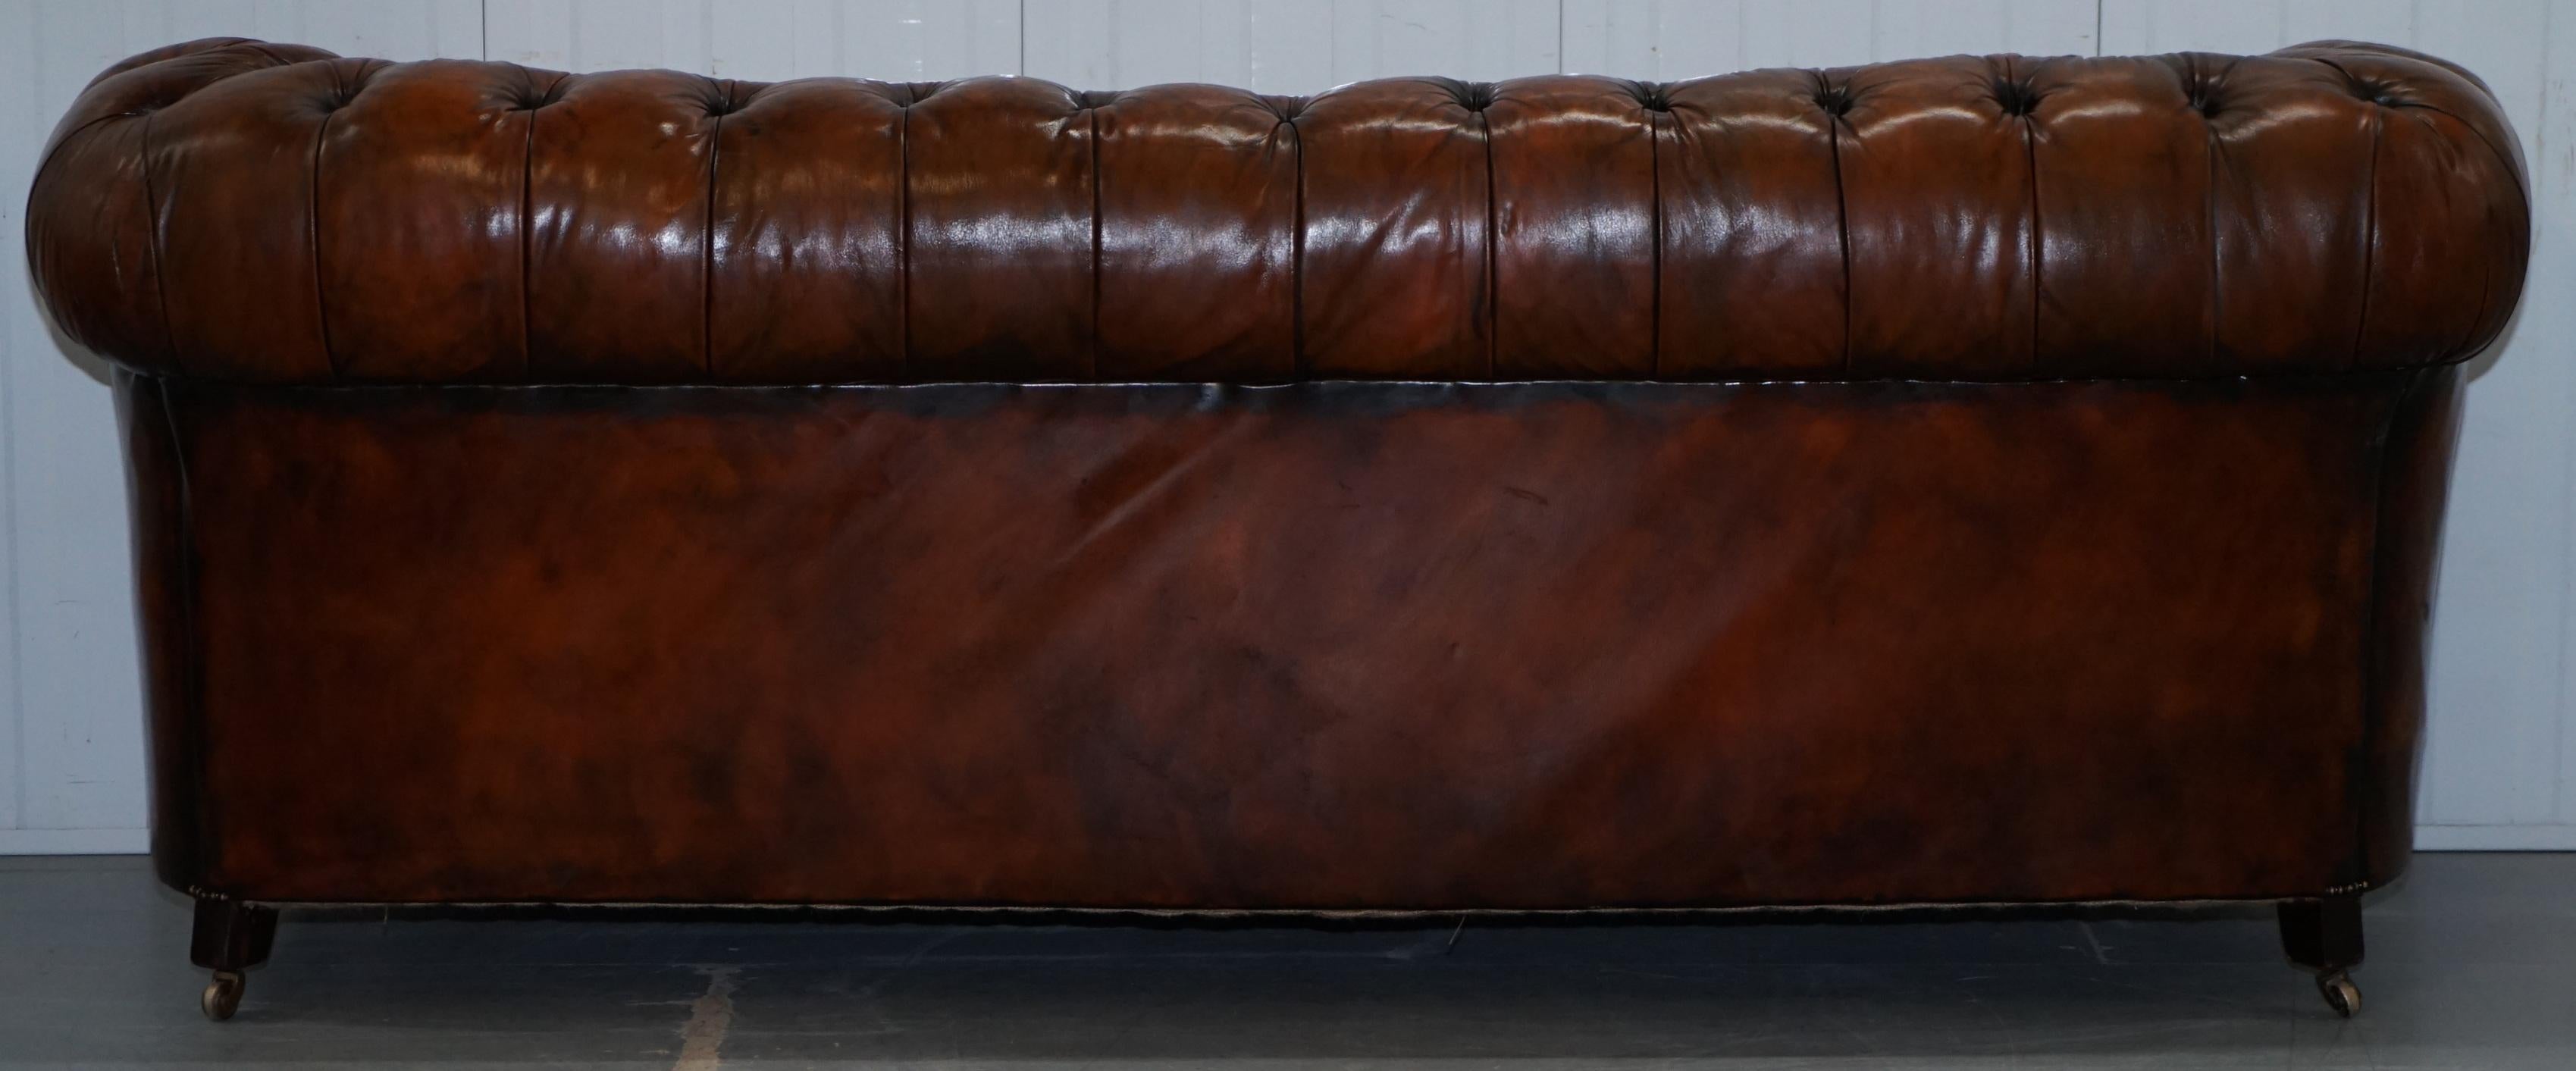 Rare Victorian Chesterfield Hand Dyed Brown Leather Sofa Horse Hair Coil Sprung 8